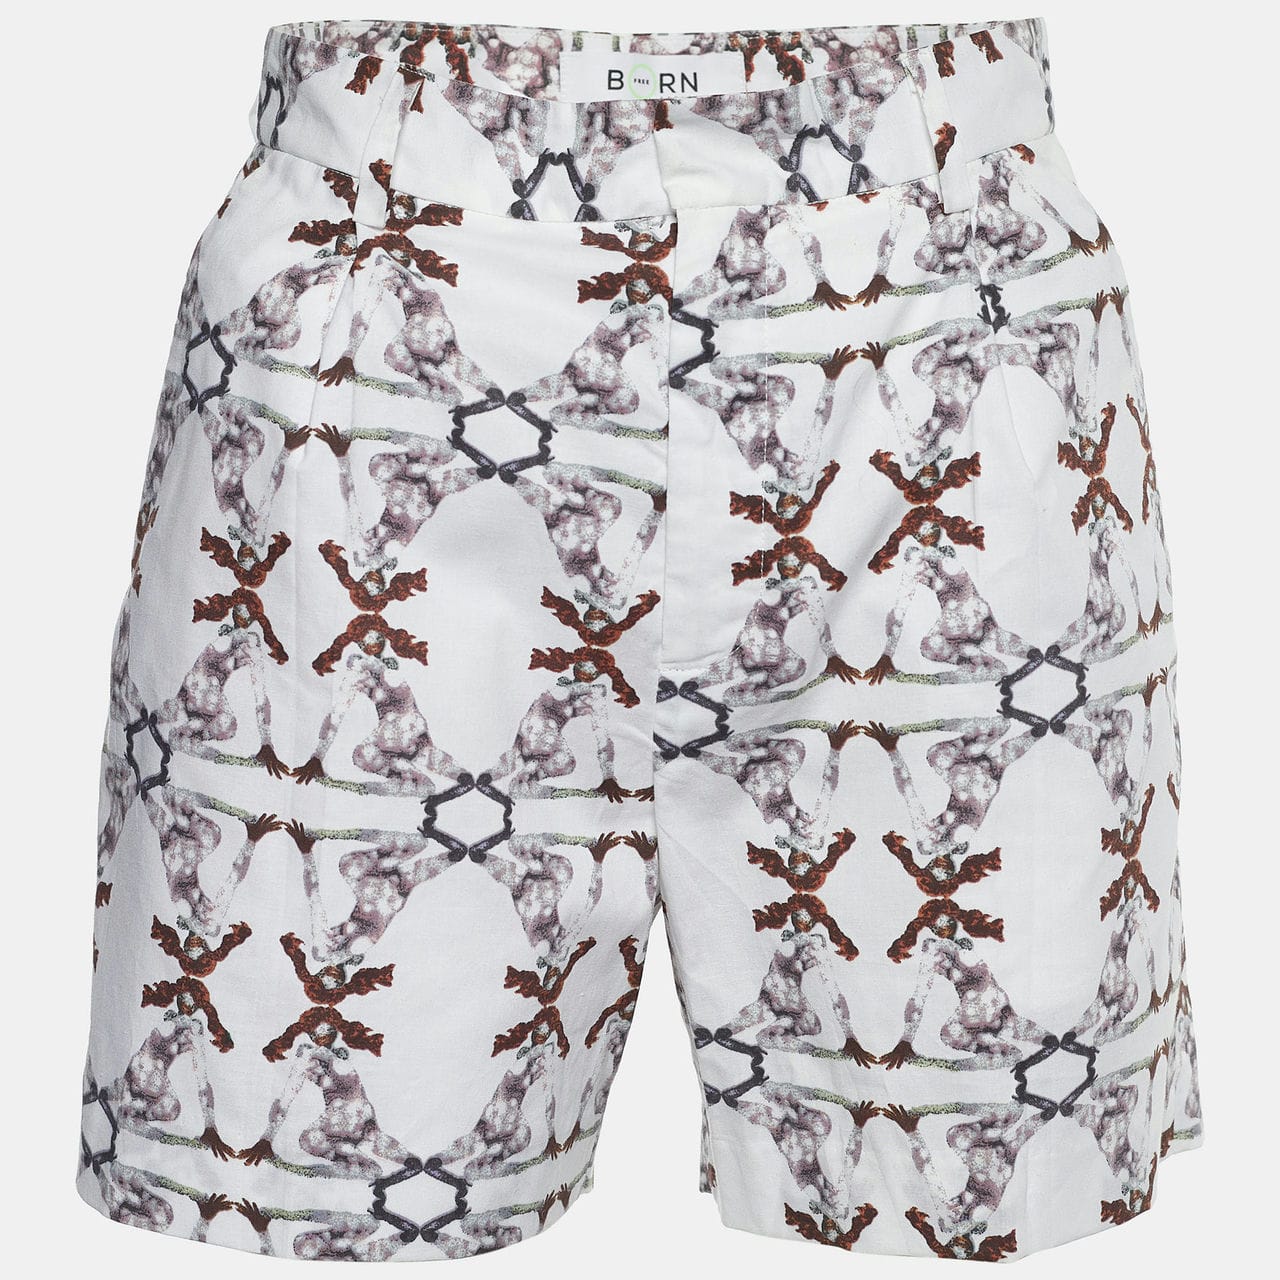 printed cotton shorts for women